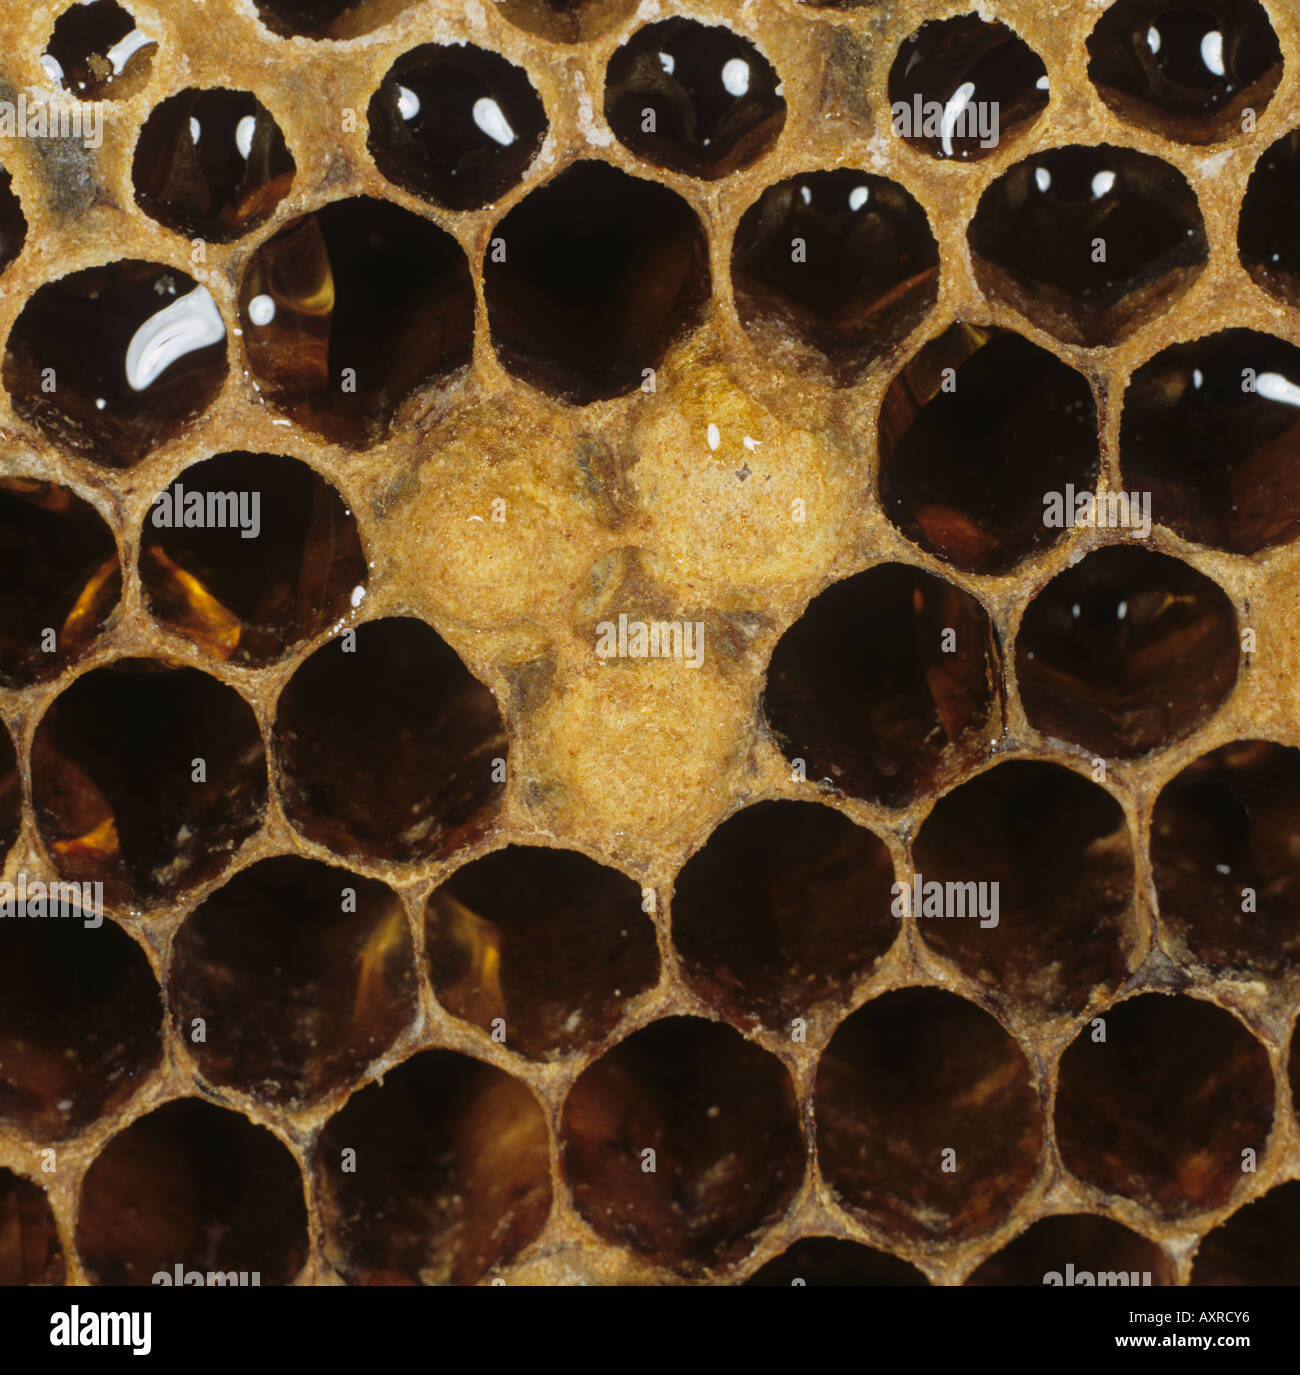 Honey bee Apis mellifera drone brood in worker cells poor hive health failing queen Stock Photo